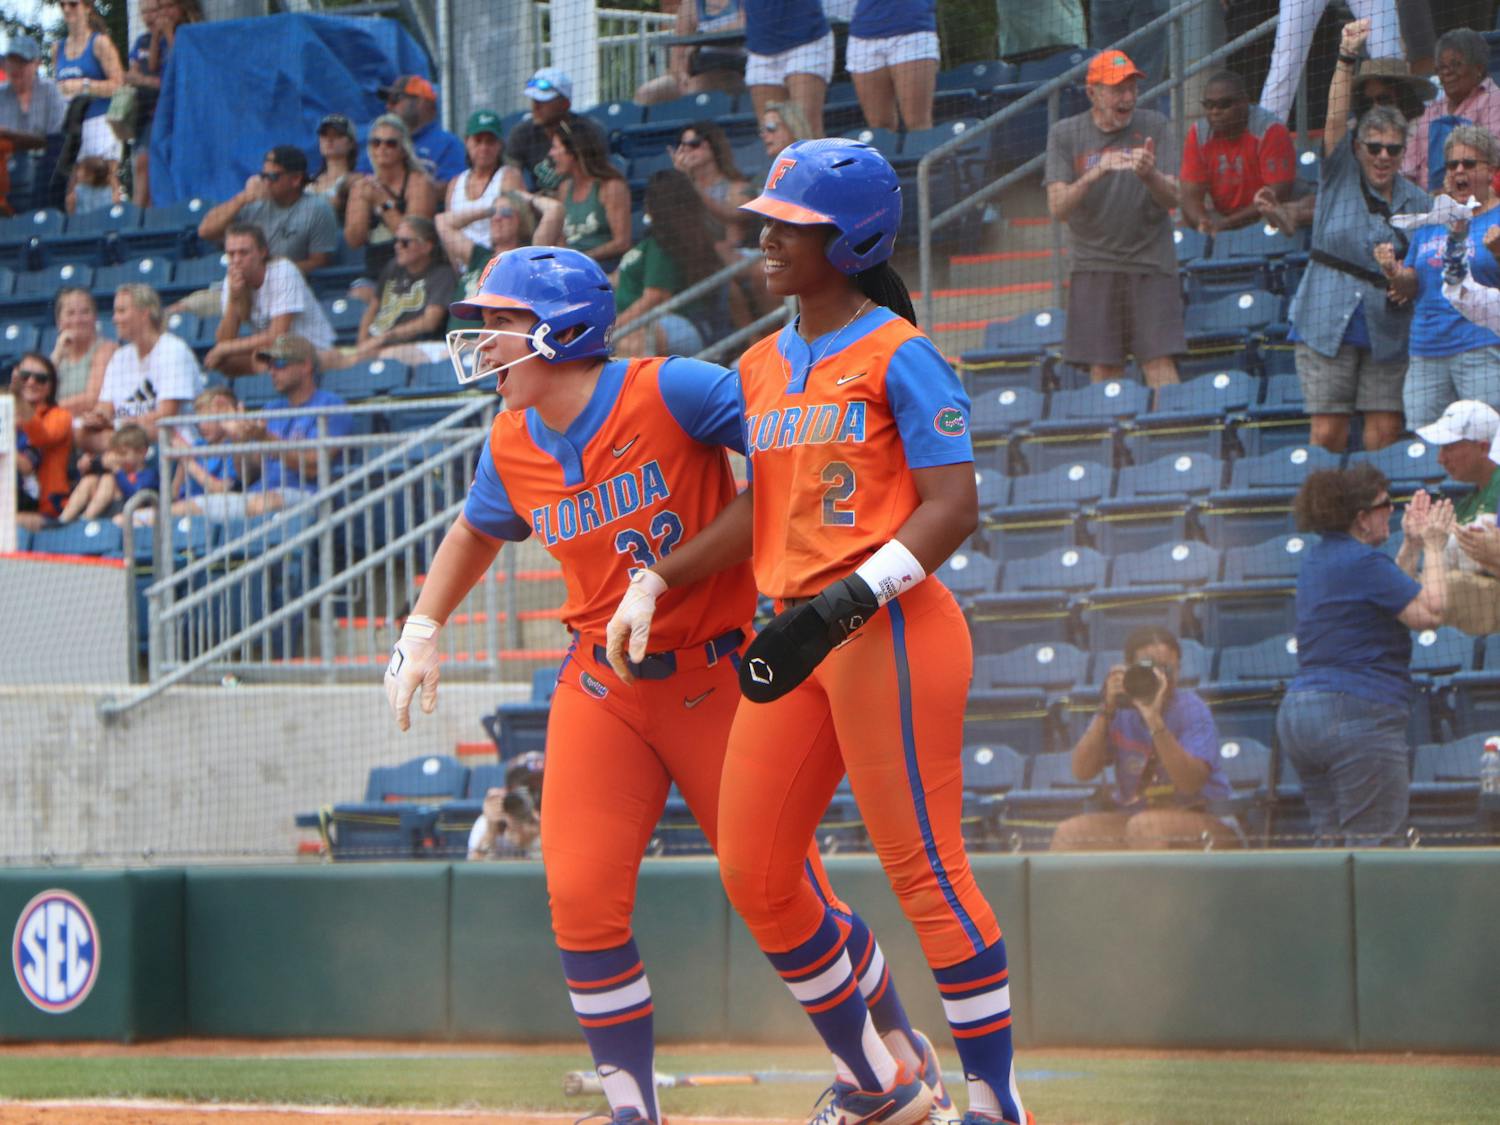 Florida's Kendyl Lindaman and Cheyenne Lindsey celebrate against South Florida on May 21. Lindaman and Lindsey combined for three hits and three RBIs in a 10-0 victory over South Alabama Saturday.